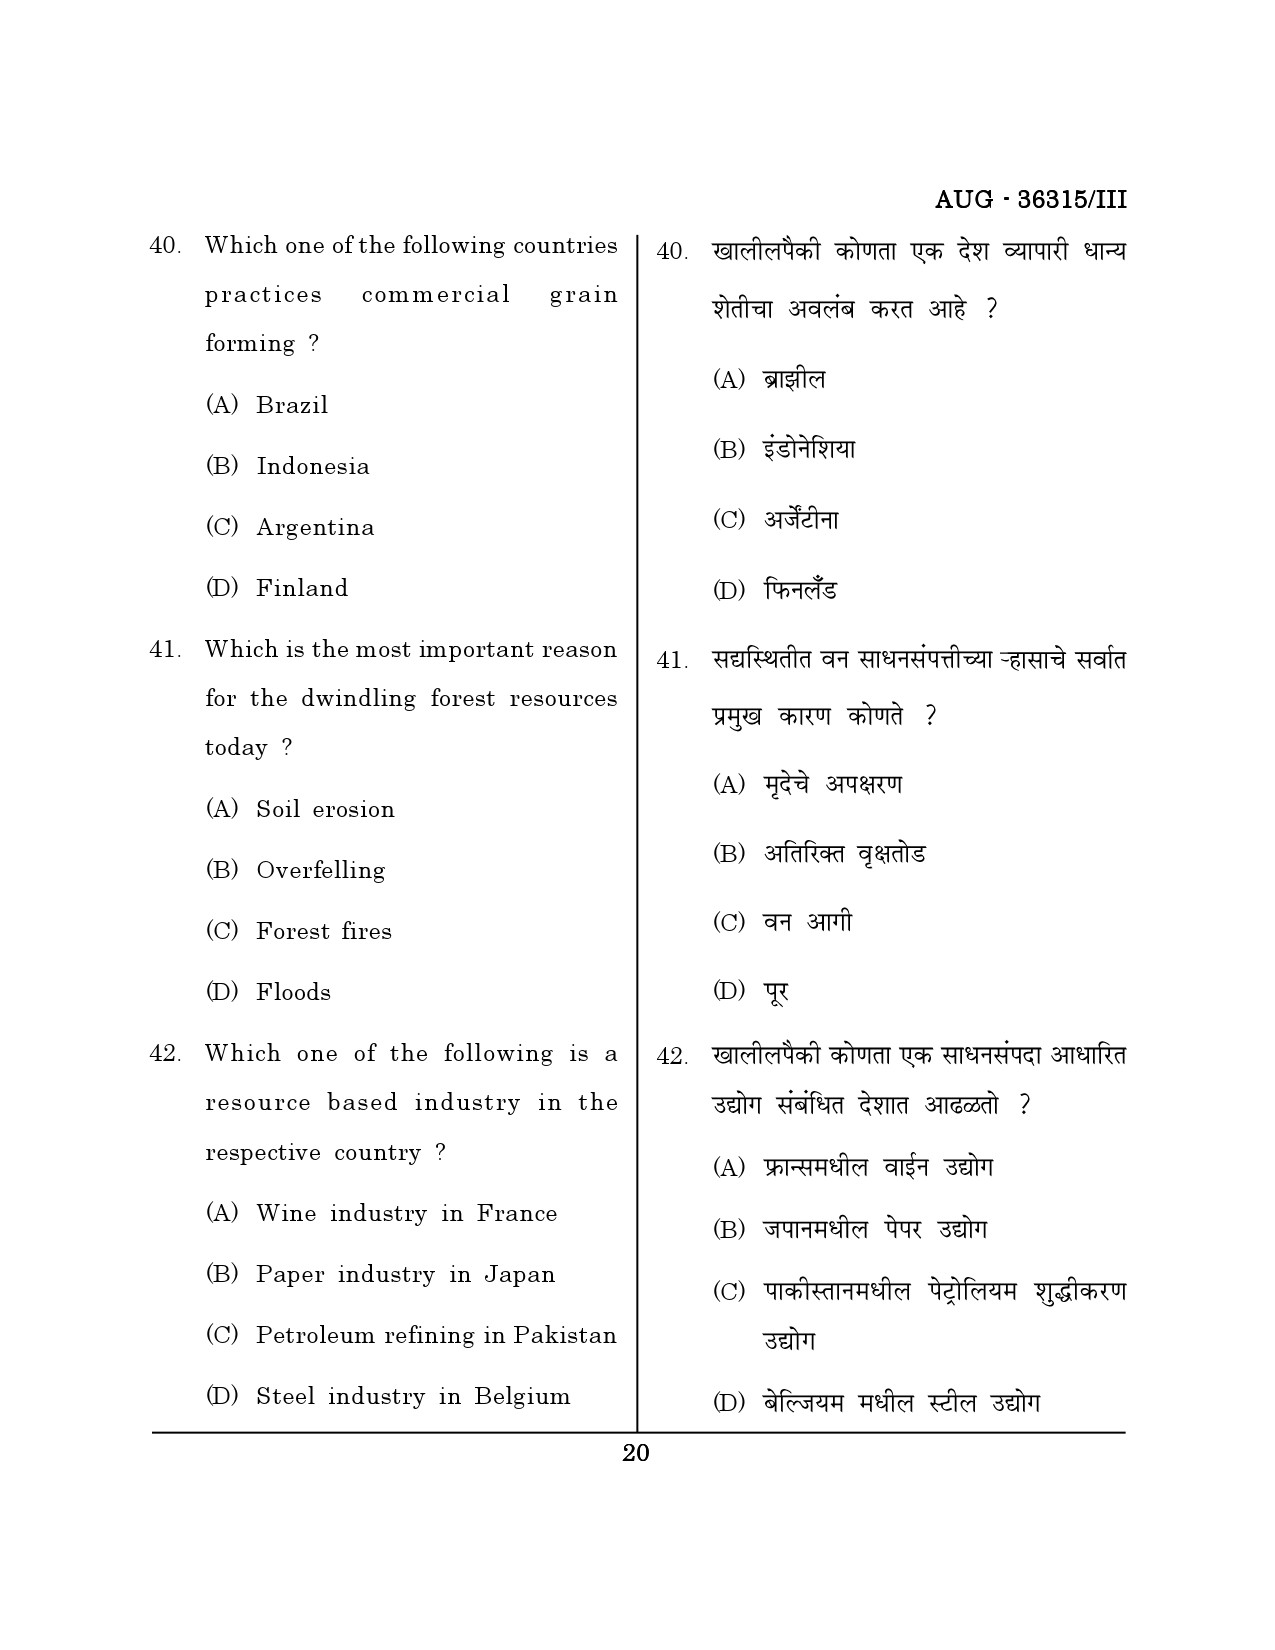 Maharashtra SET Geography Question Paper III August 2015 19